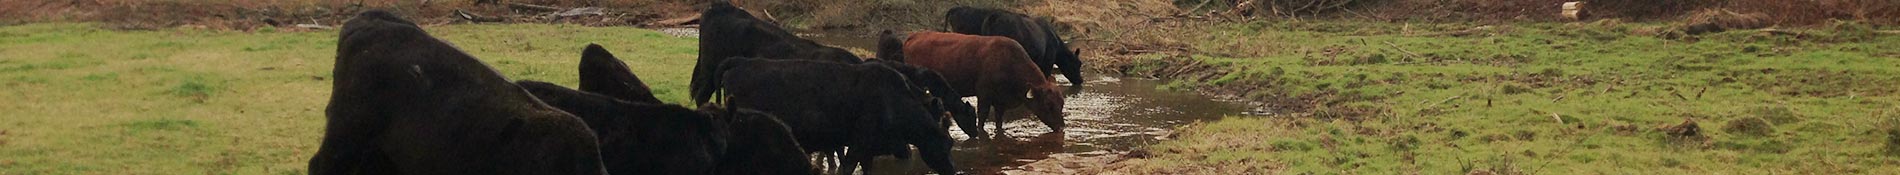 Leid Farms farm photo of cows drinking water